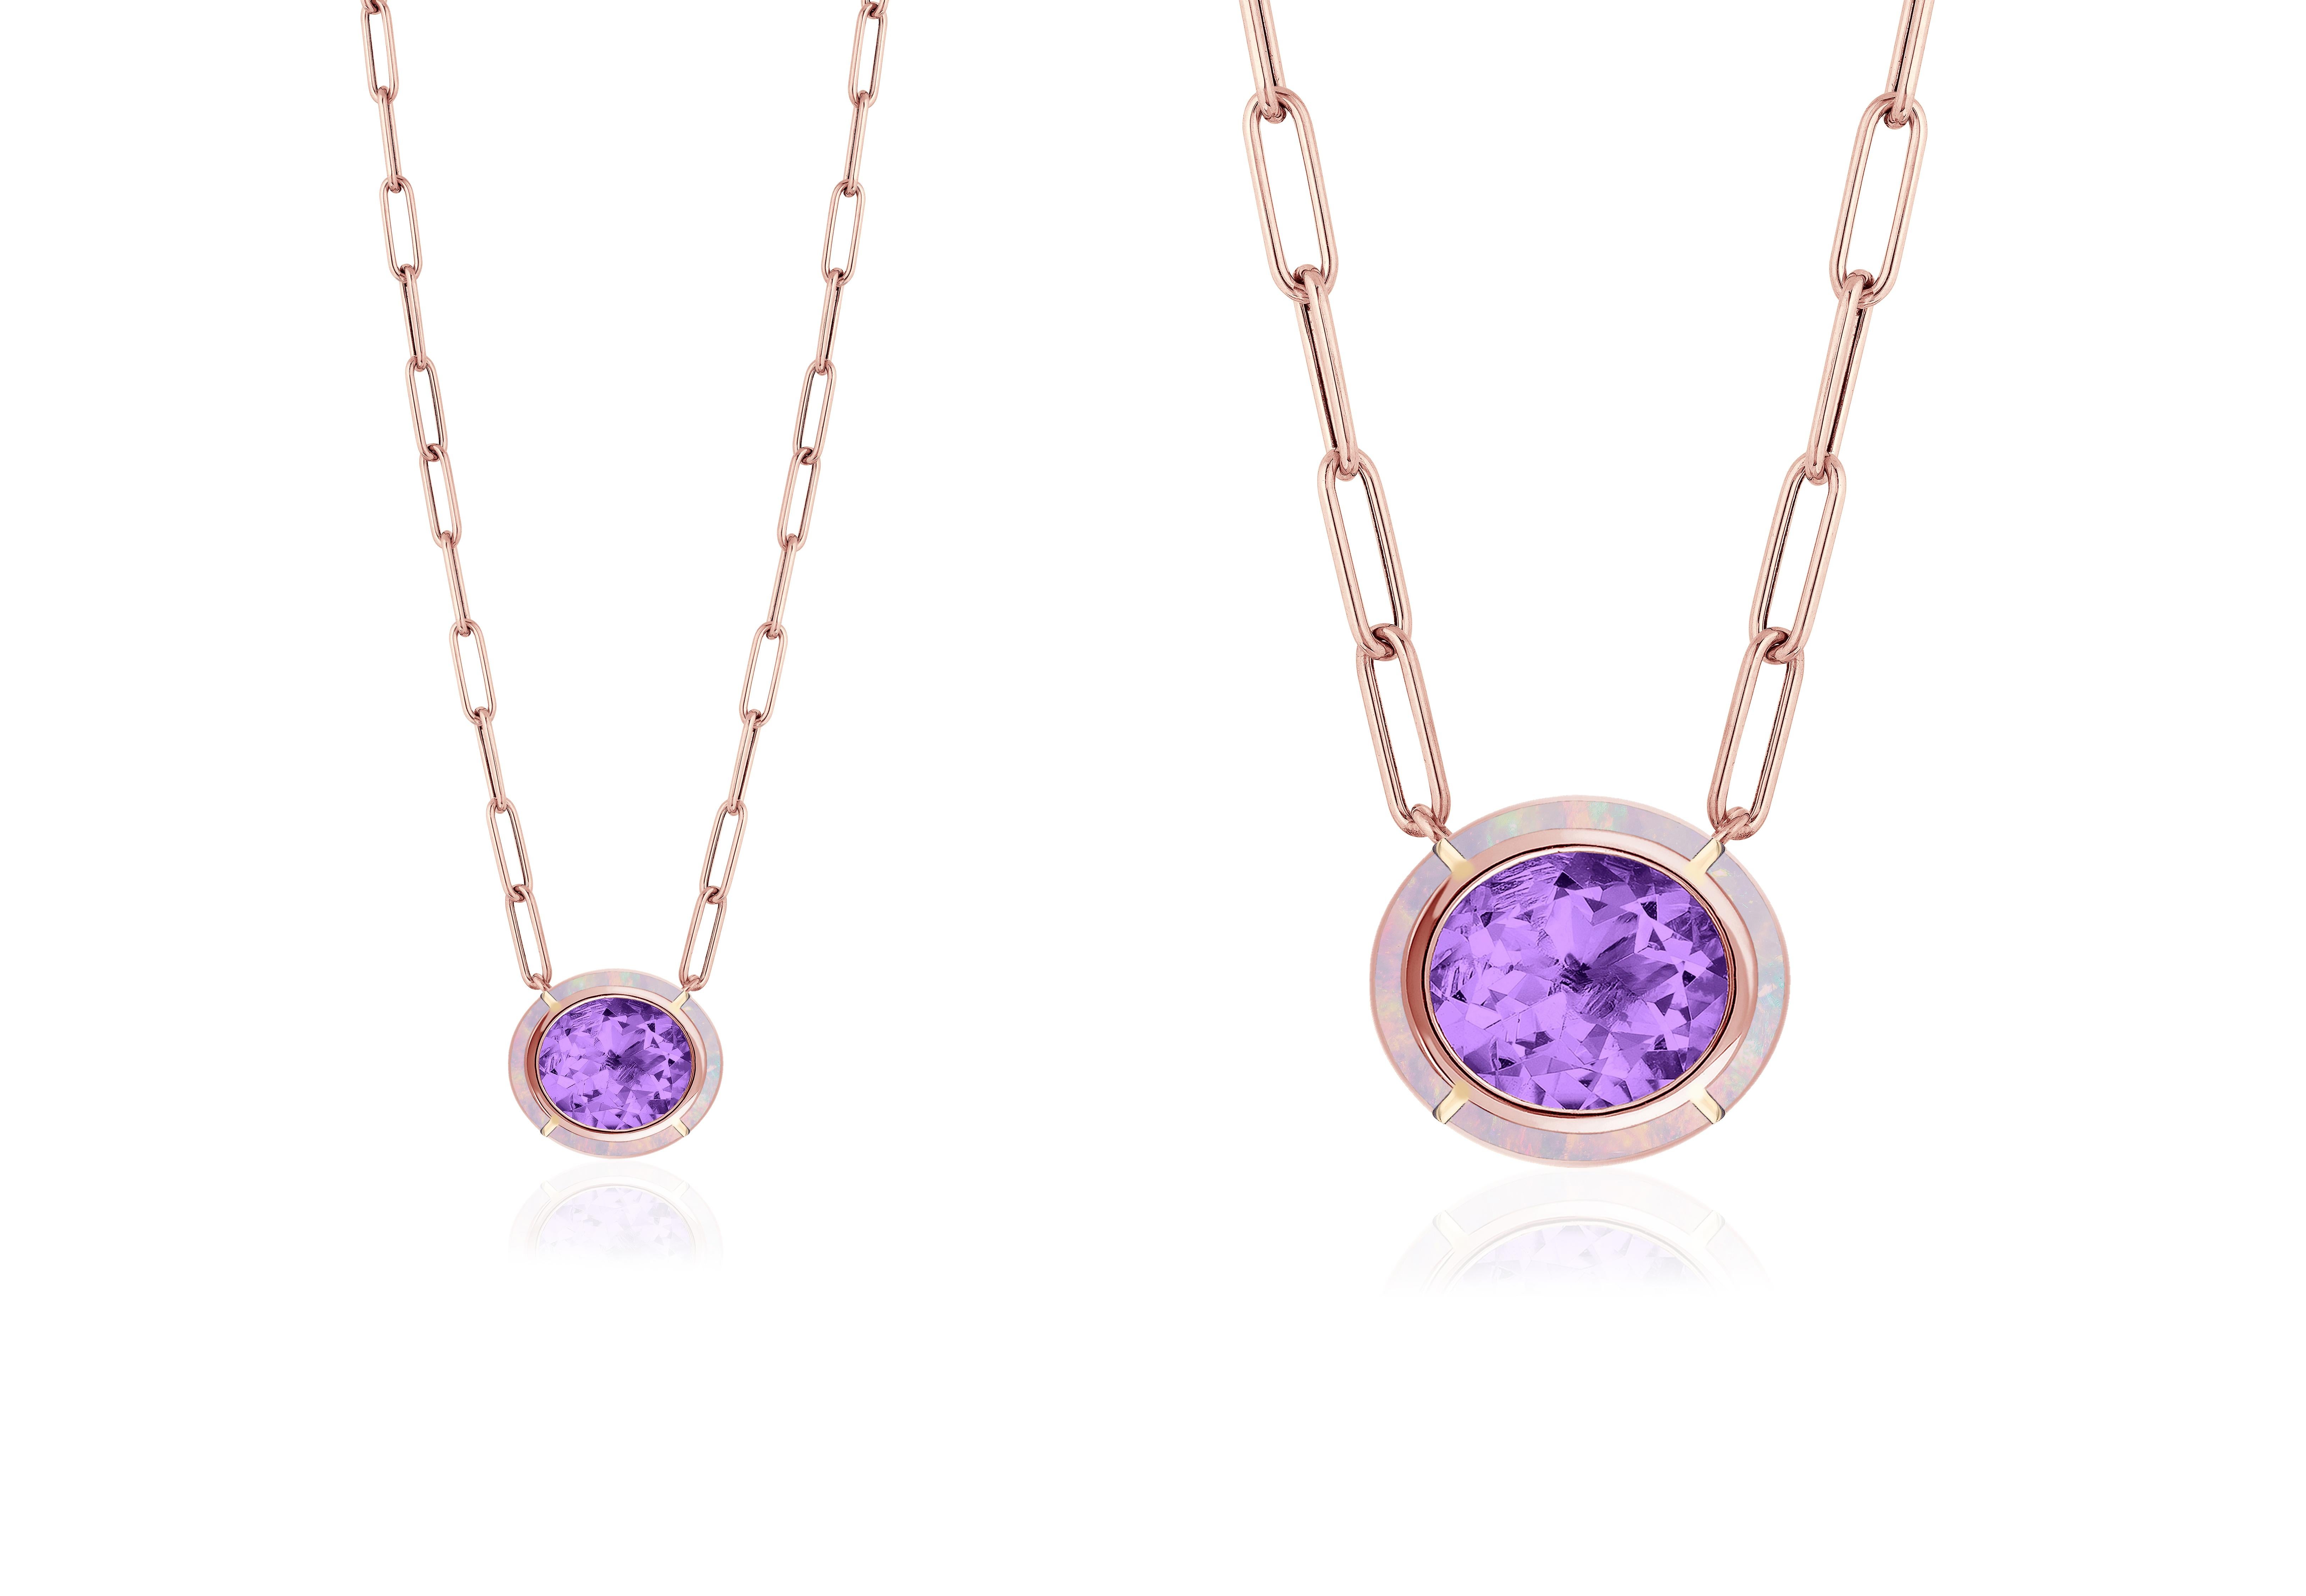 This Amethyst & Pink Opal Inlay Oval Pendant in 18K Rose Gold is a stunning piece of jewelry from the 'Mélange' Collection. The pendant features an oval-shaped Amethyst surrounded by a Pink Opal stone, both set in 18K Rose gold. The combination of